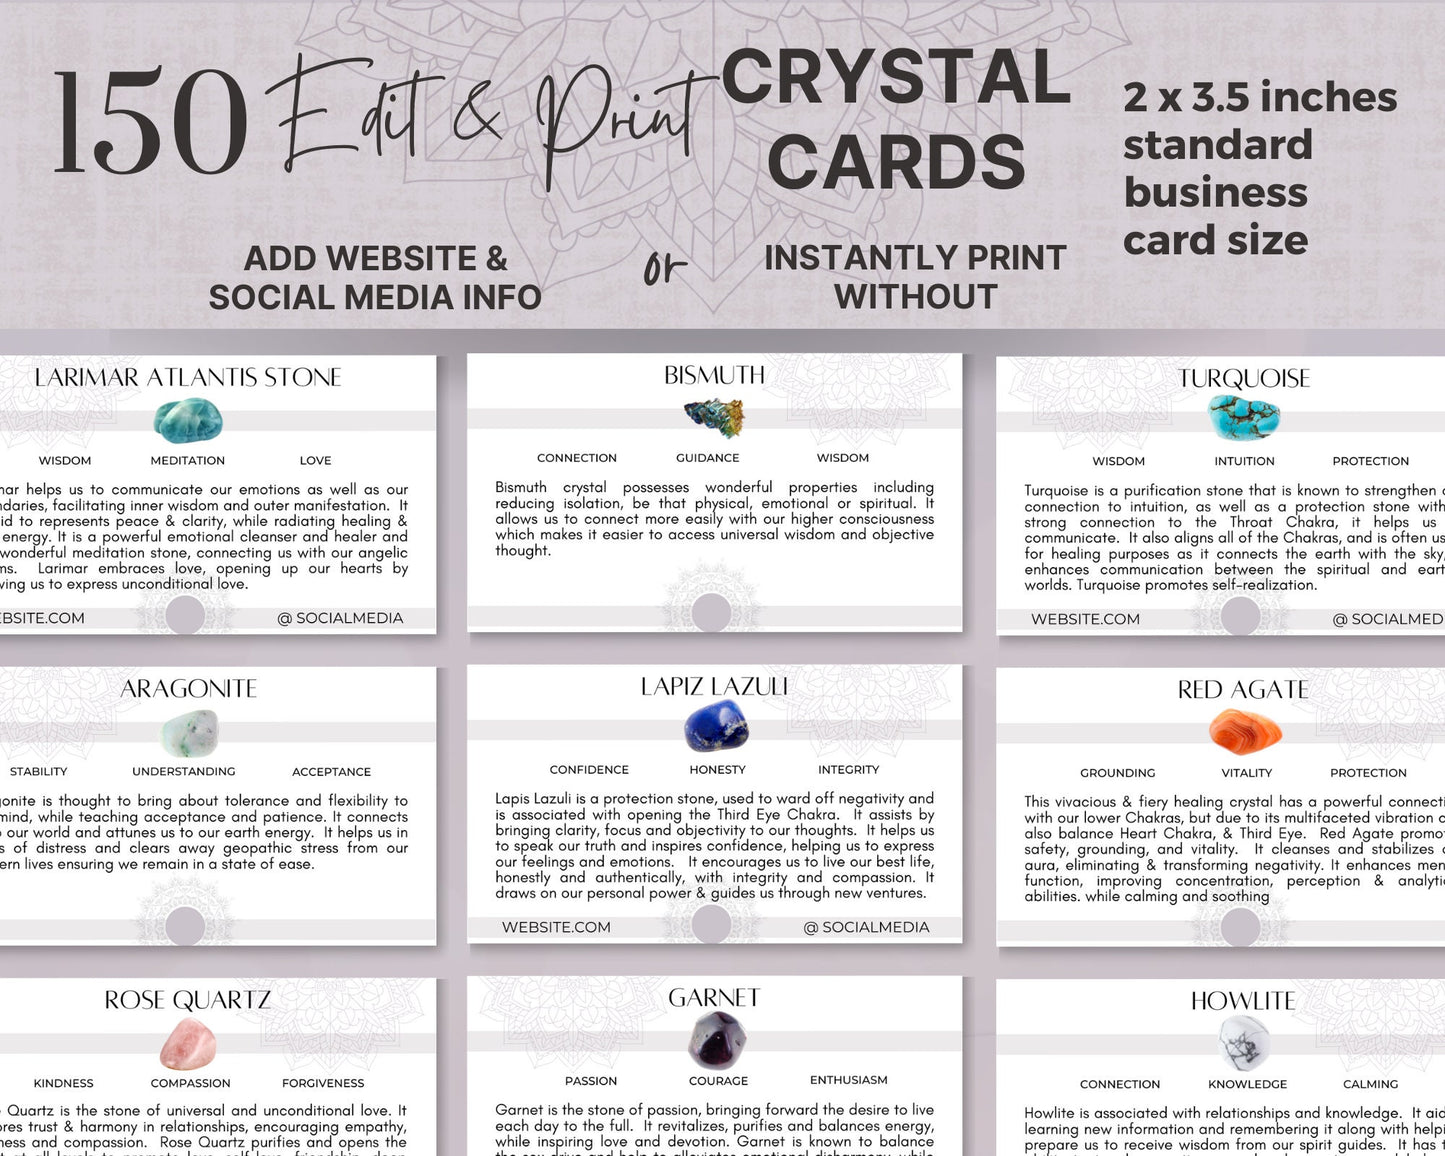 150 Crystal Cards in Business Card Size, Editable Gemstone Cards, Crystal Reference Cards, Crystal Meanings, Crystal Card Inserts, Digital